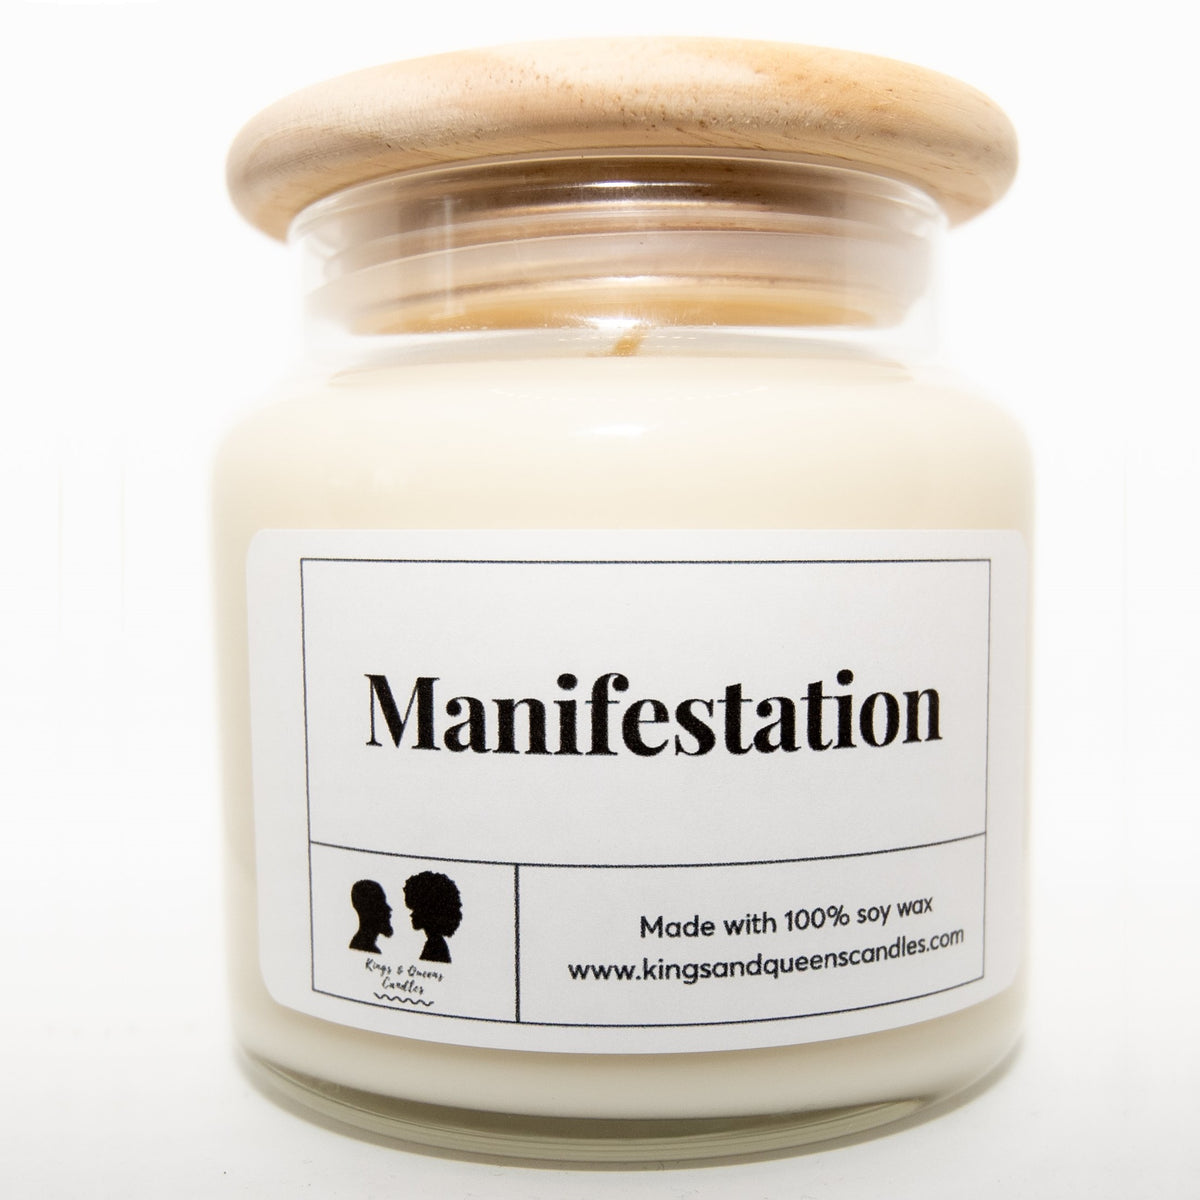 Manifestation - Kings and Queens Candles